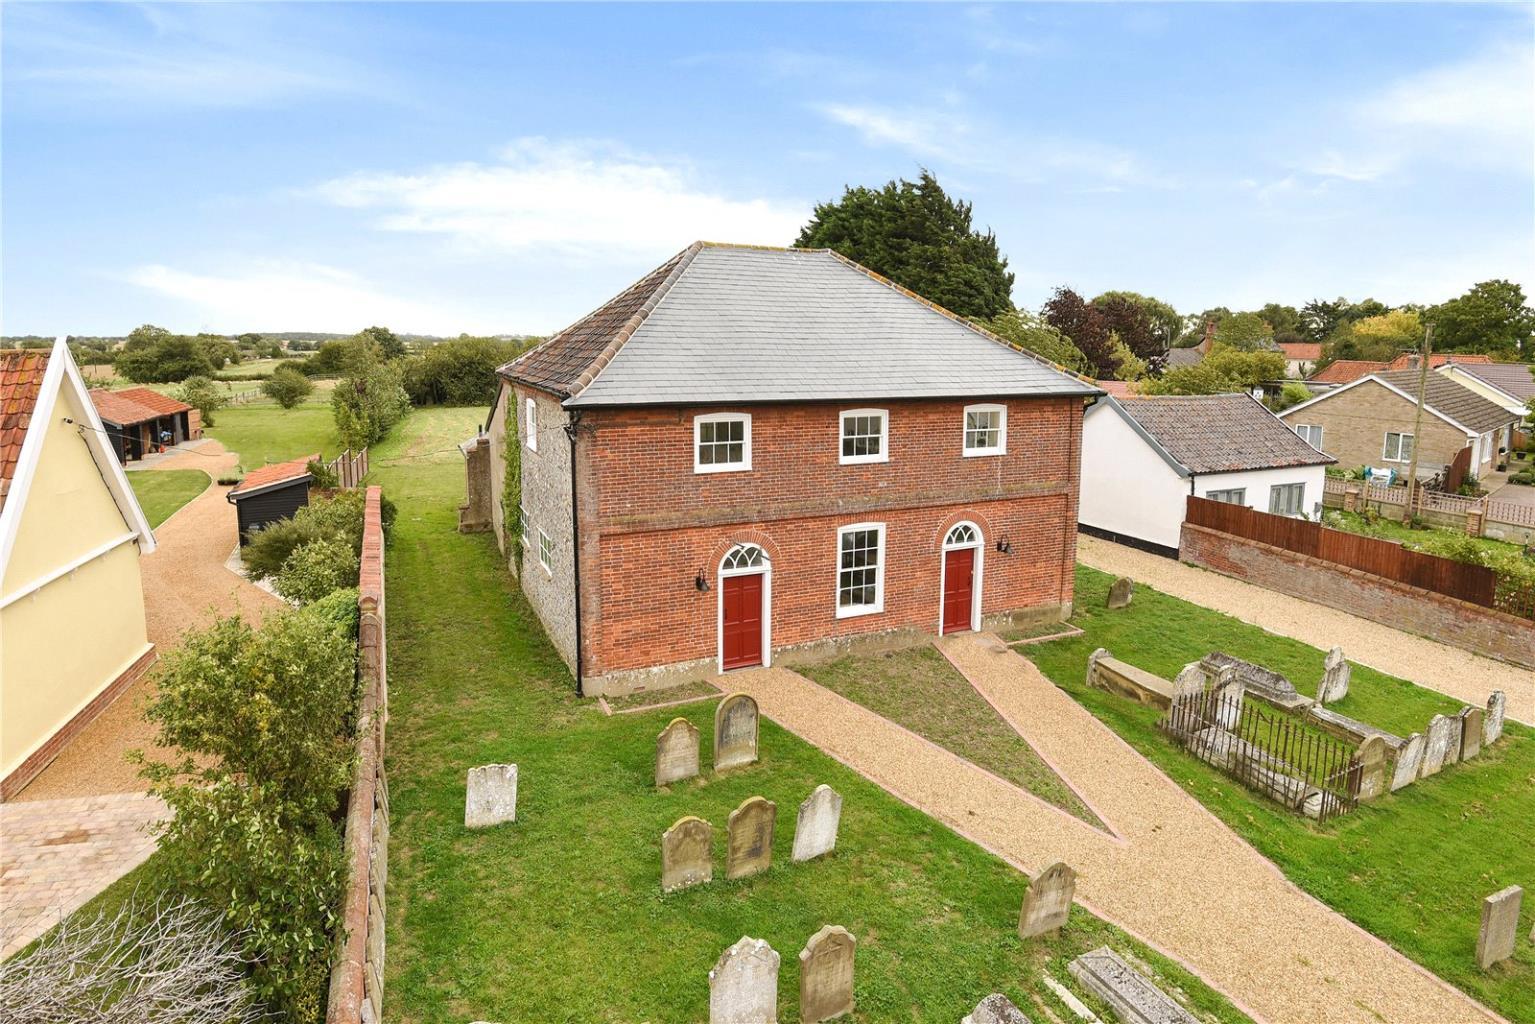 This converted chapel for sale comes with graves in the front garden. Image: Bedford Estate Agents